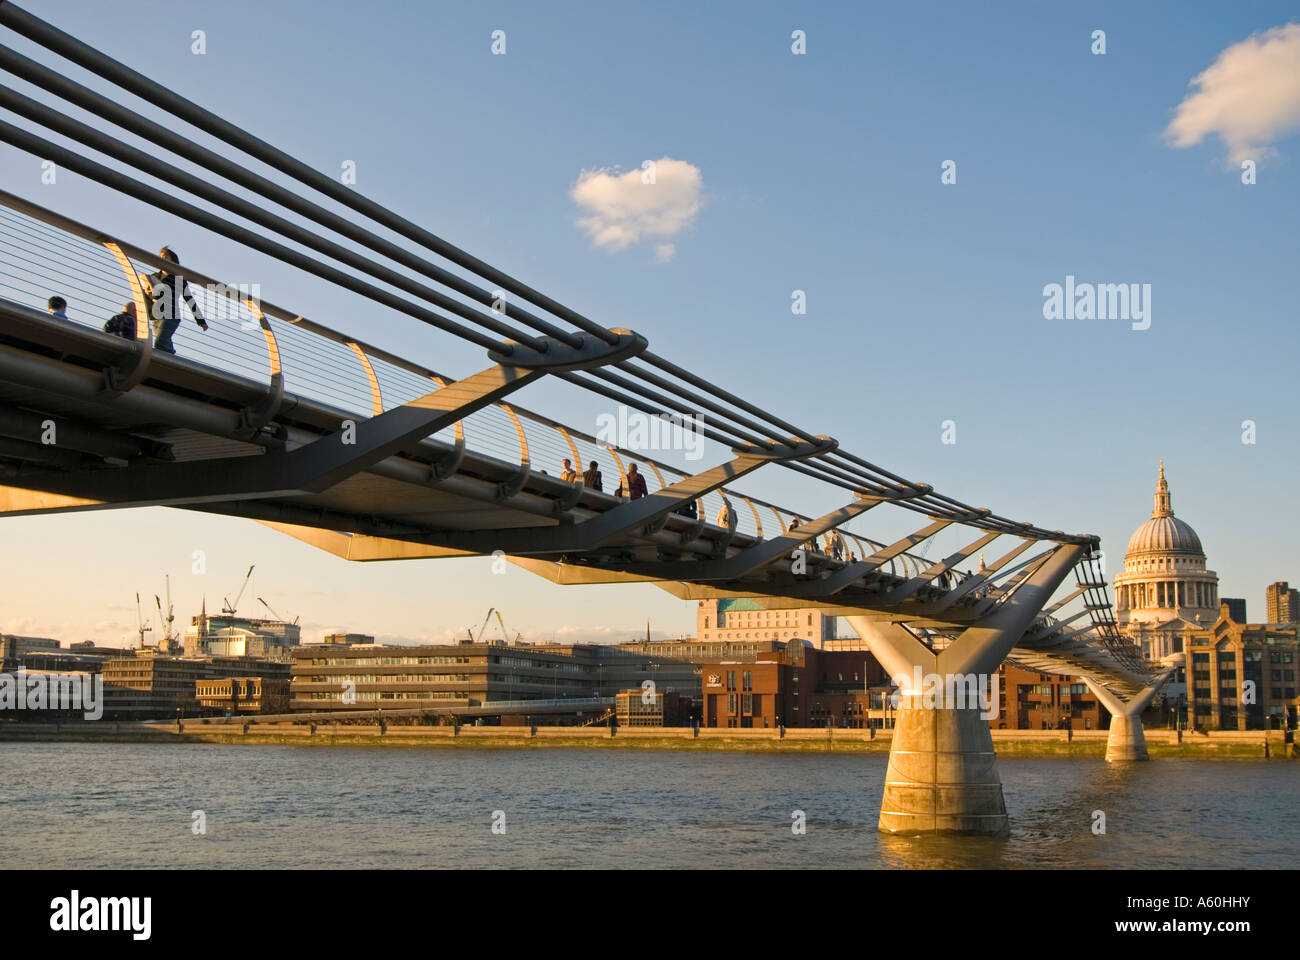 Horizontal wide angle of the Millennium Bridge and St Paul's cathedral across the River Thames on a sunny evening. Stock Photo